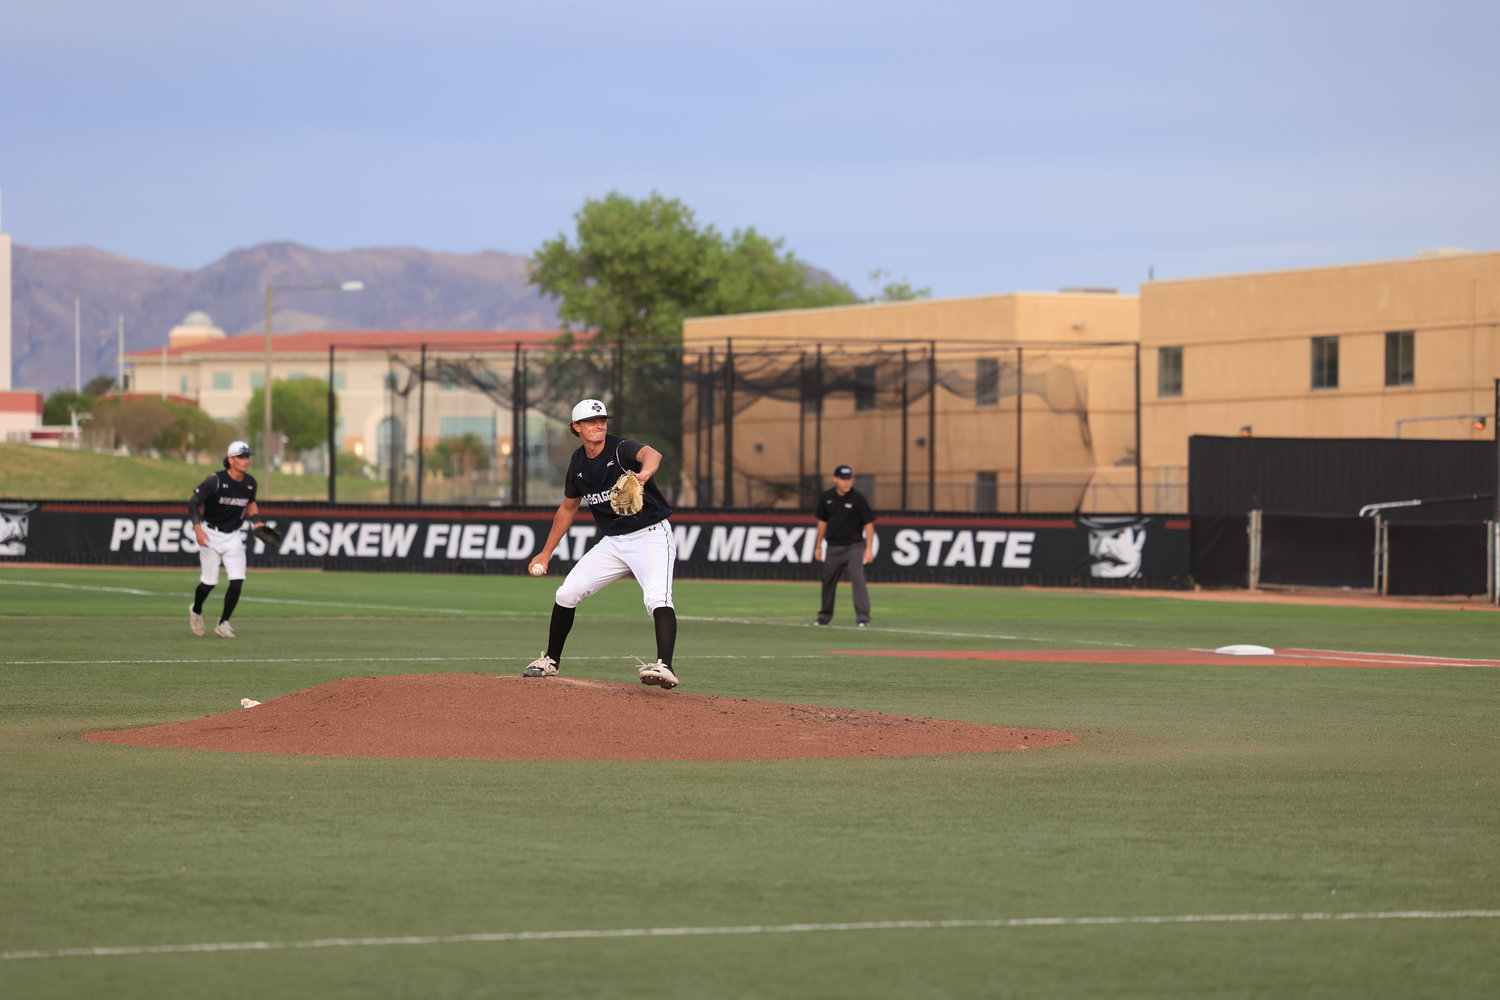 NM State's Josh Laukkanen fires a pitch at Presley Askew Field.